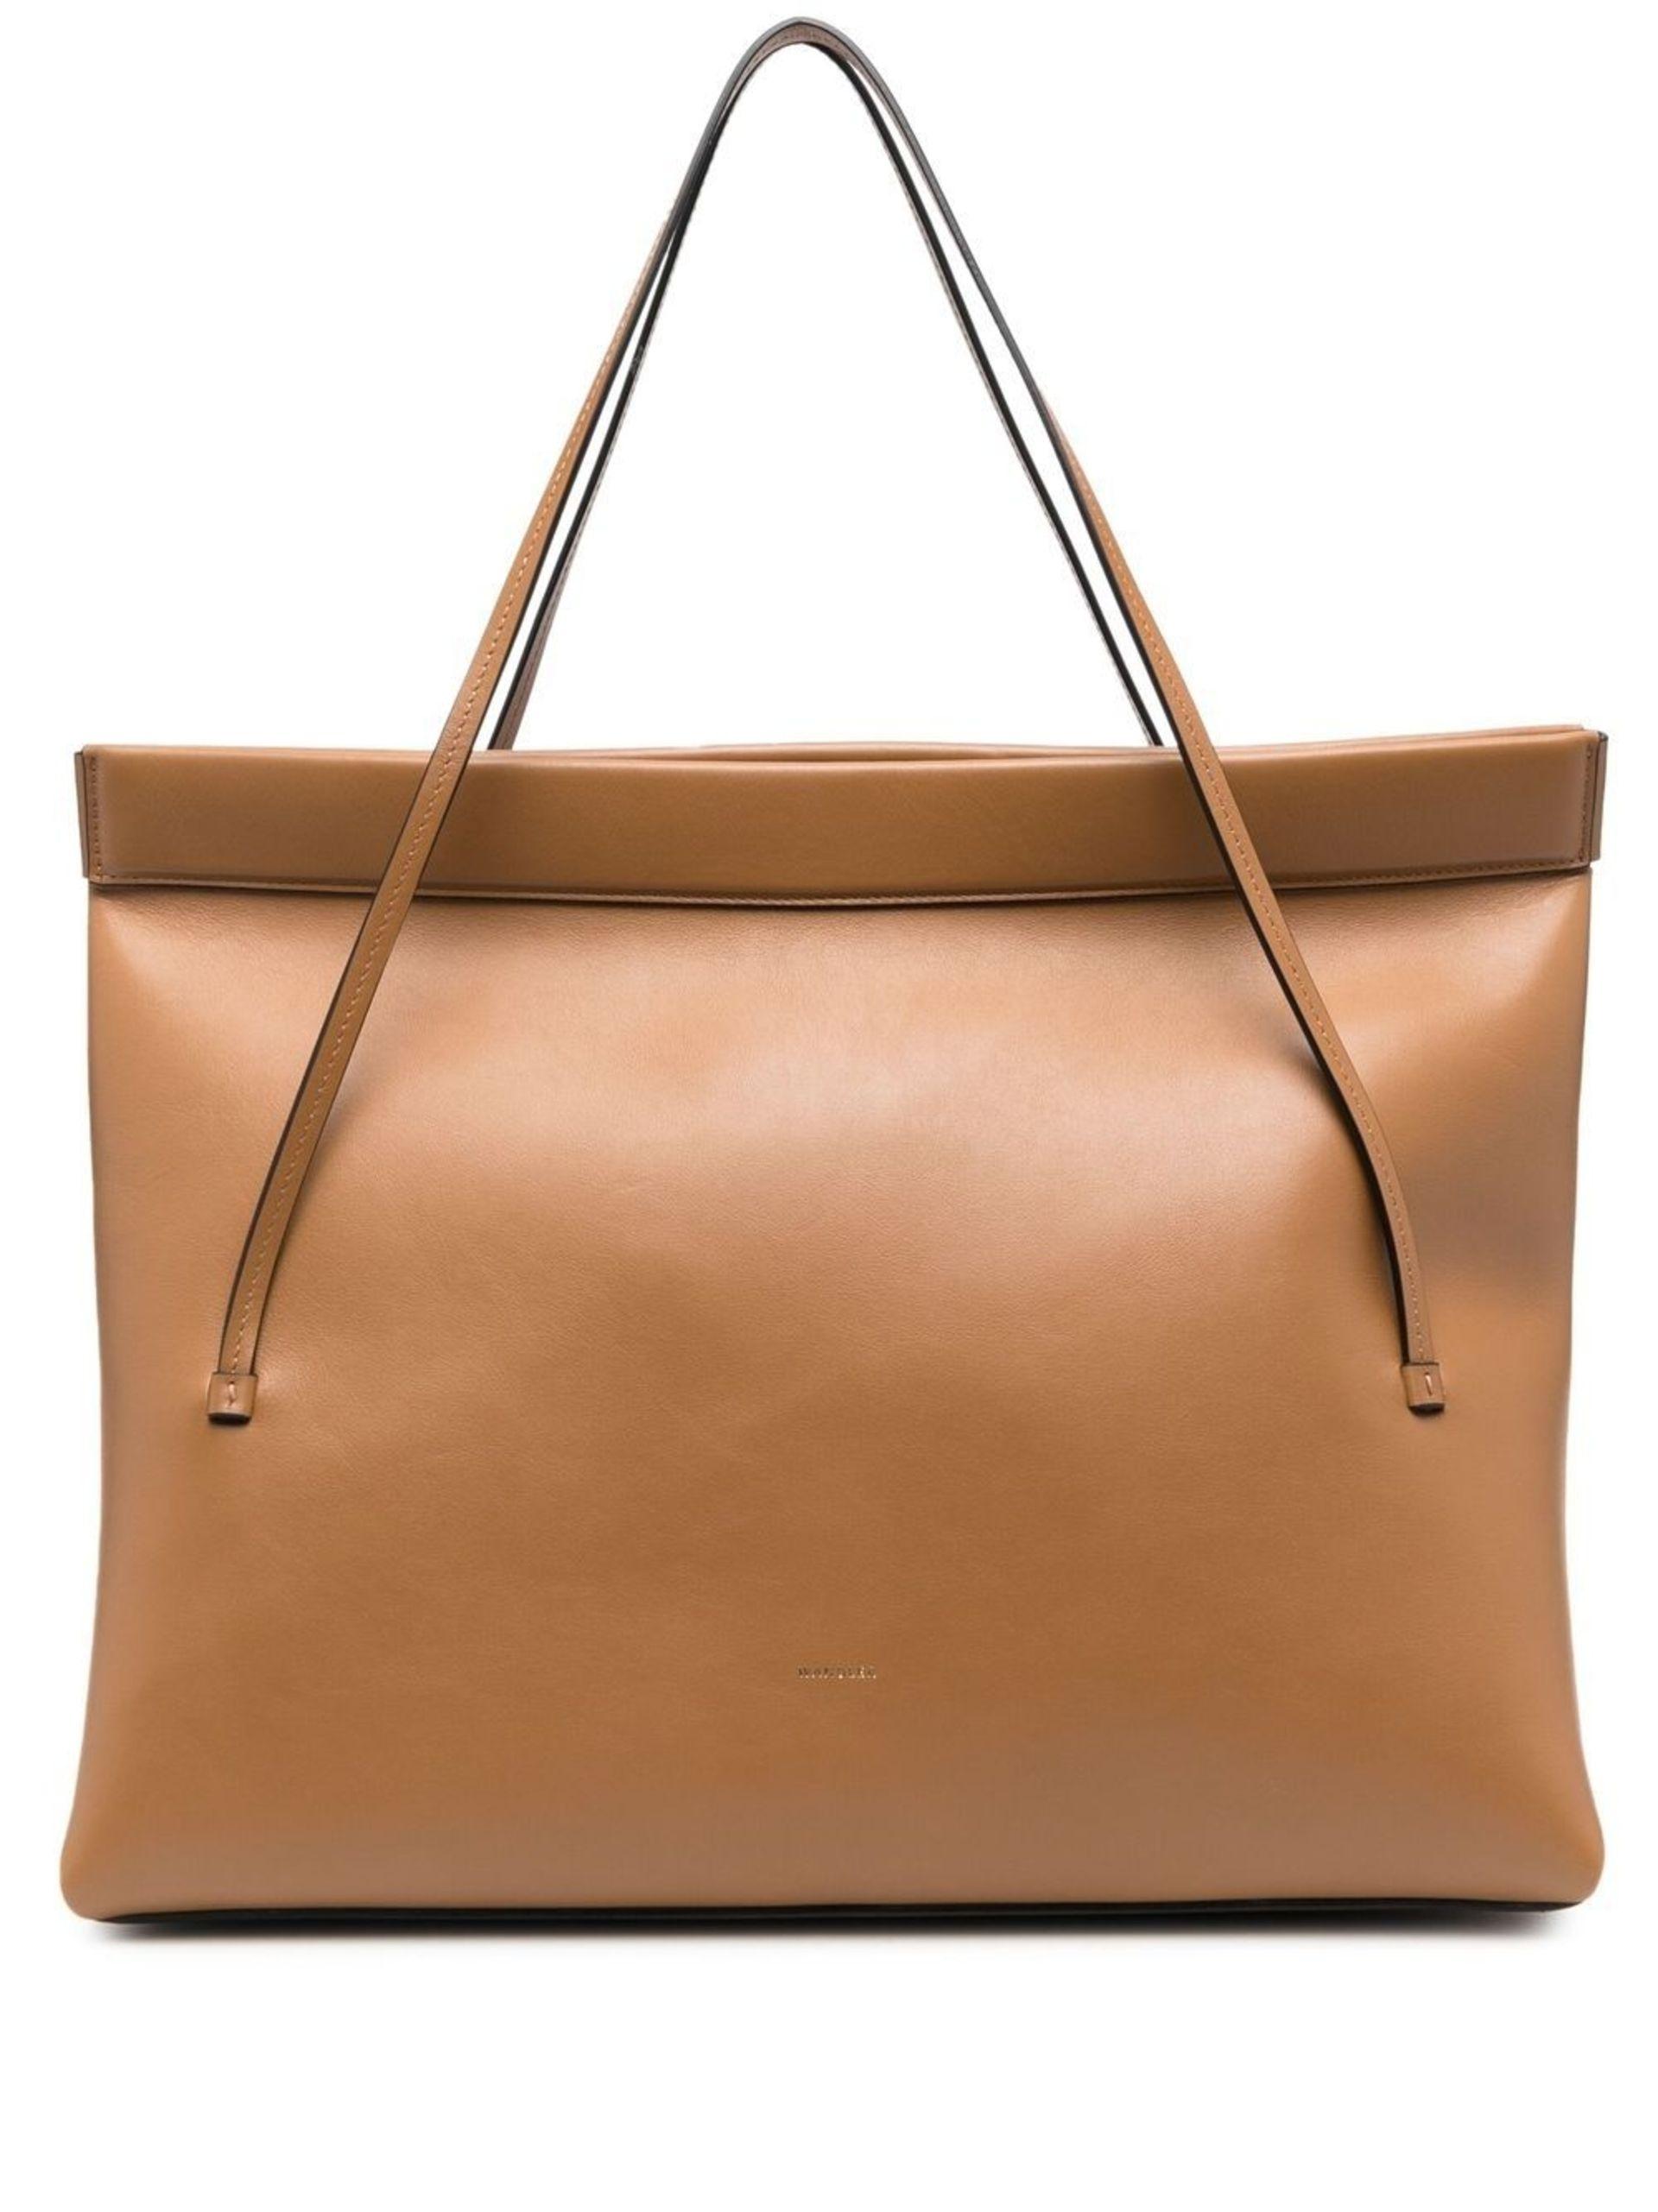 Wandler Joanna Large Leather Tote Bag in Brown | Lyst